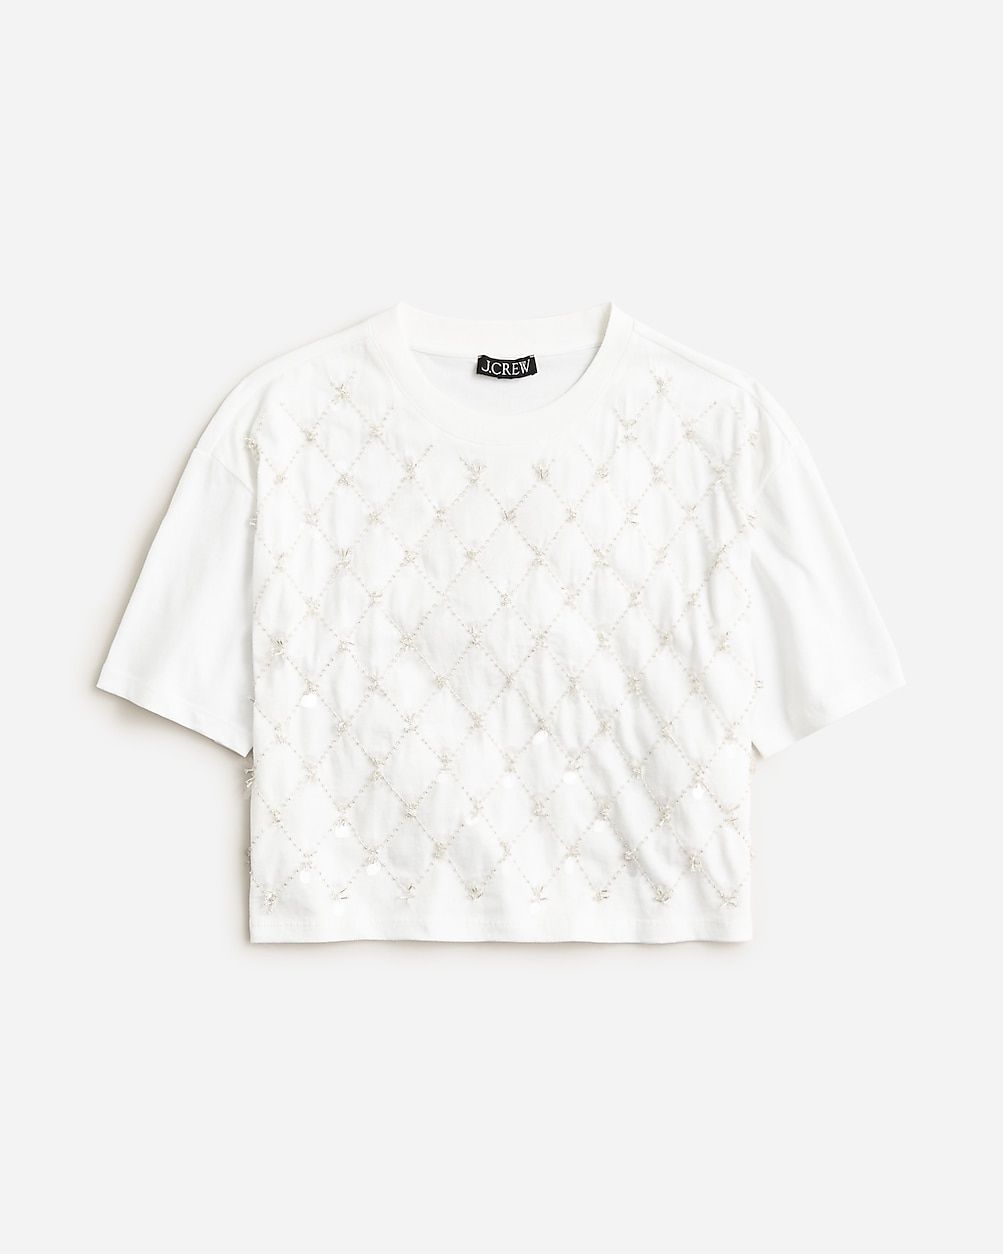 Broken-in jersey cropped T-shirt with patterned sequins | J.Crew US